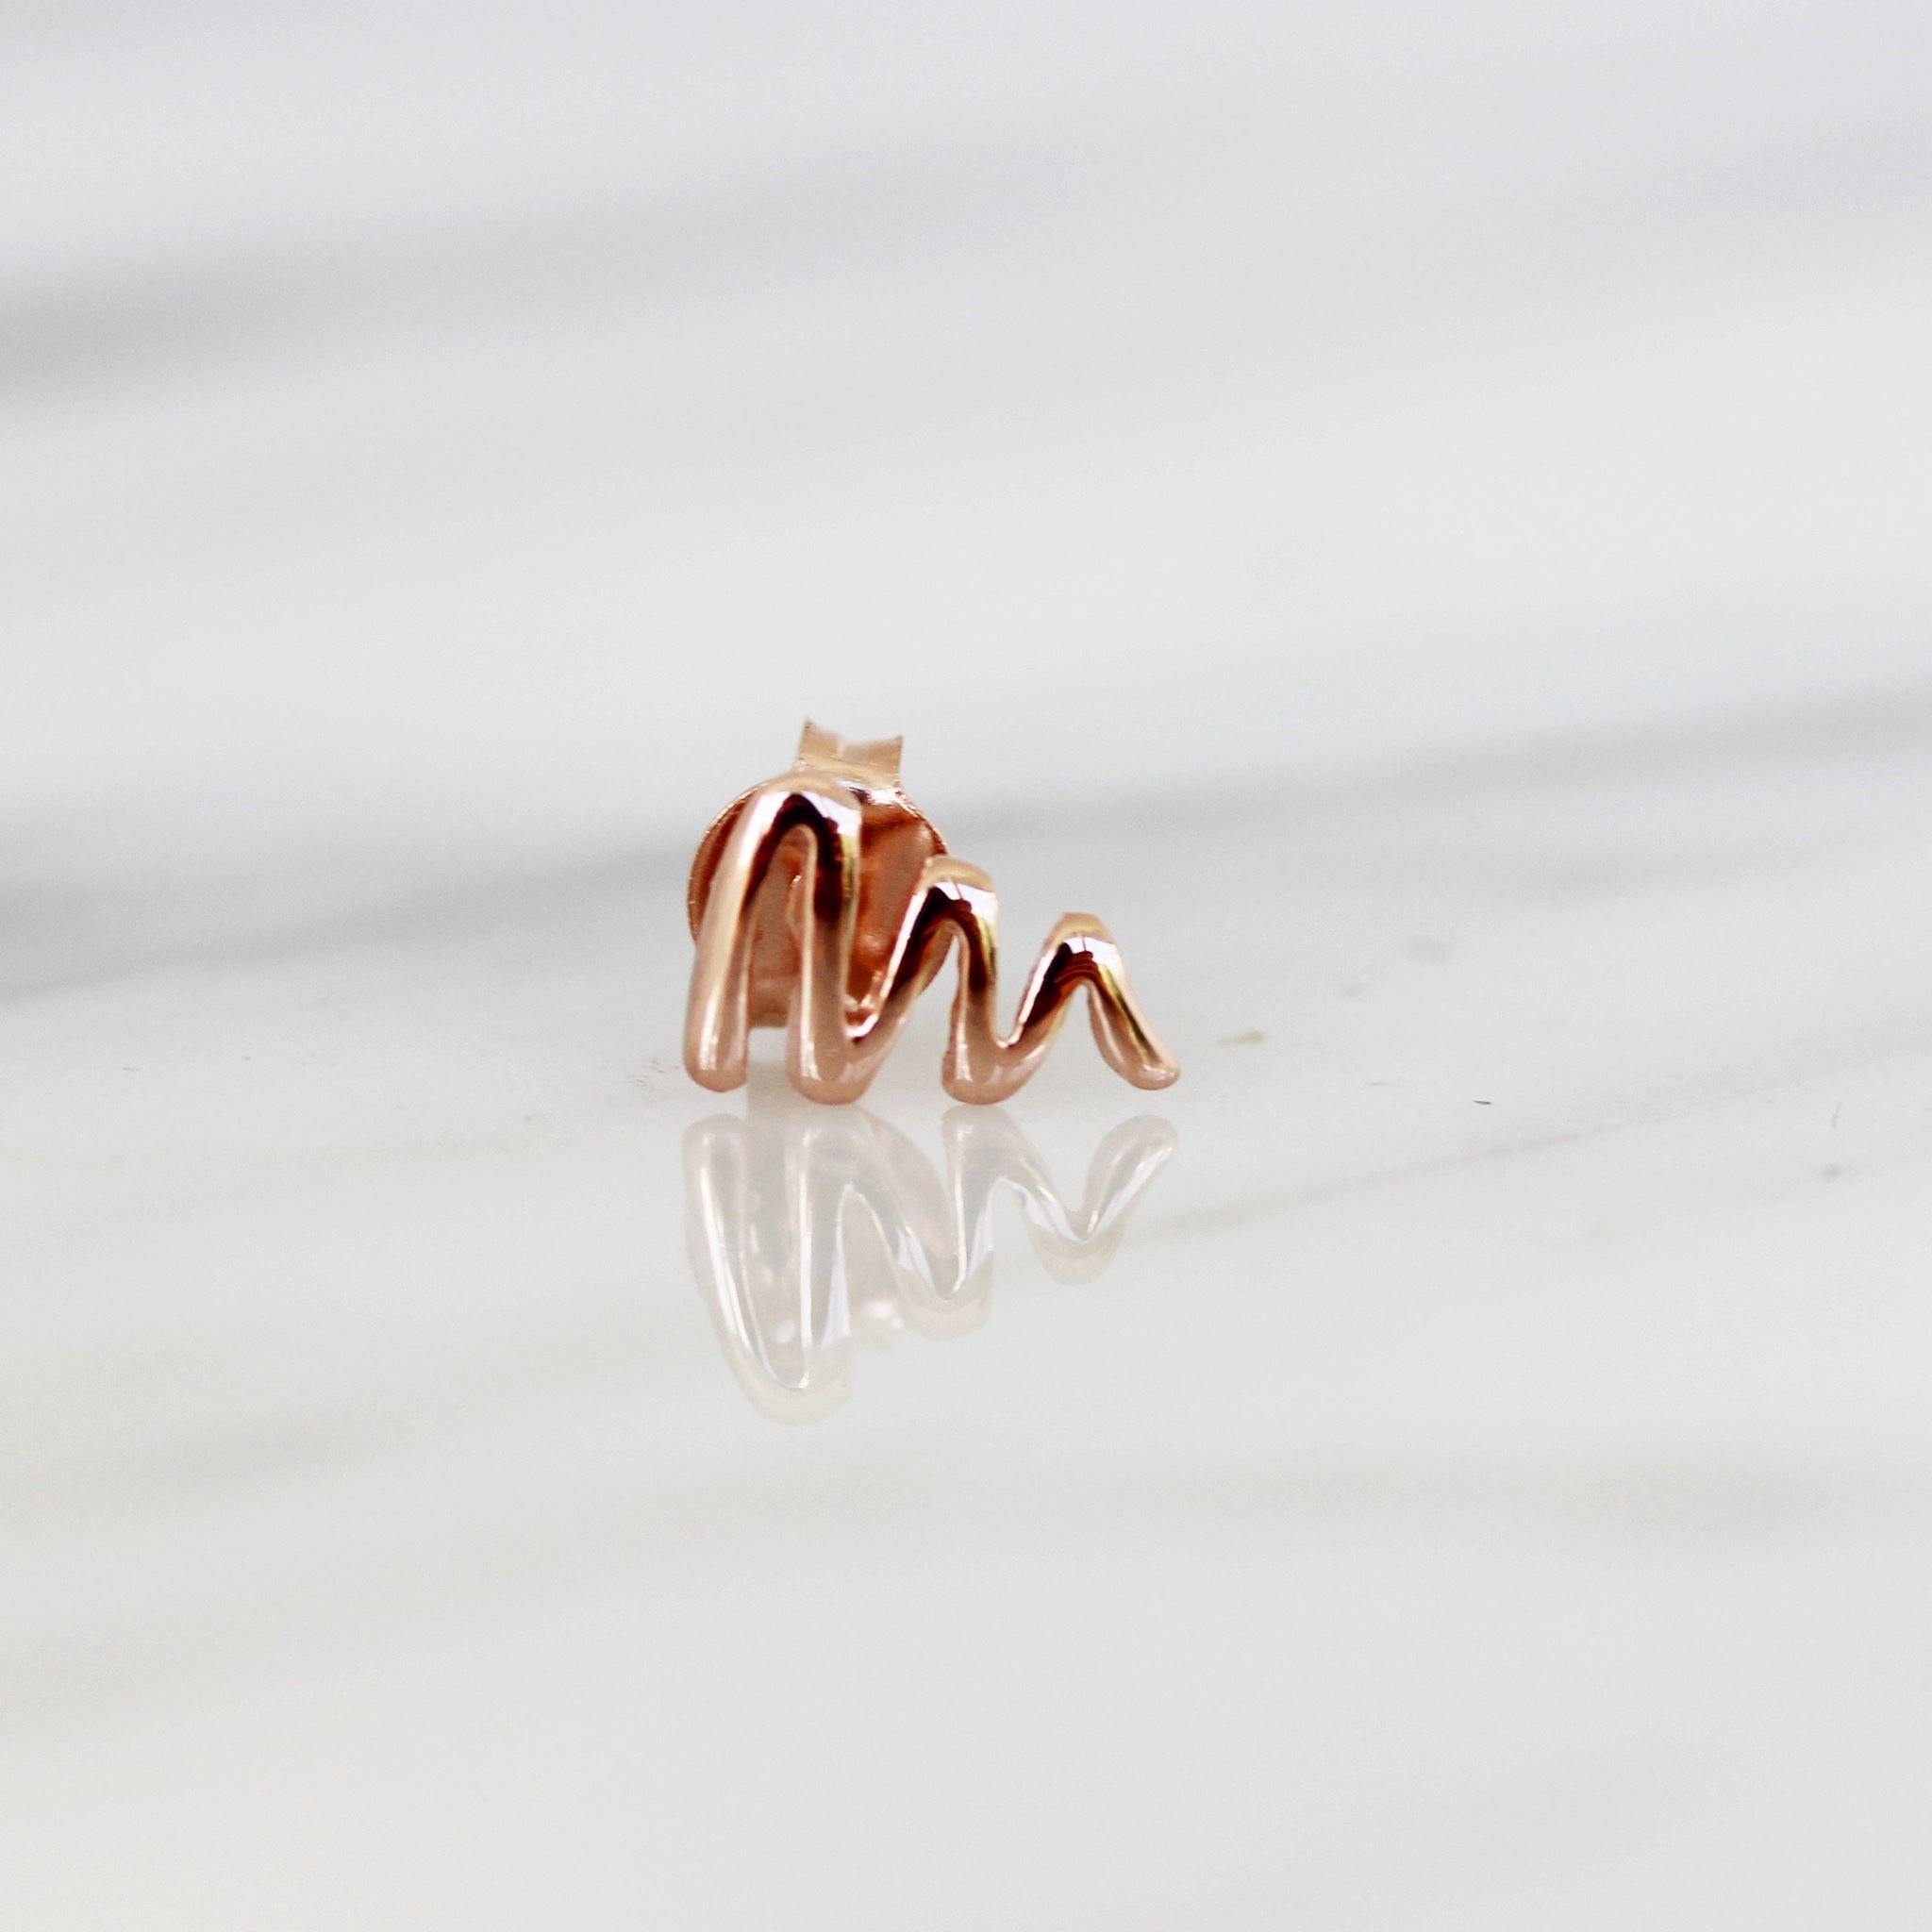 Sterling Silver Rose Gold Plated Heartbeat Heart Beat Sqiggle Stud Earrings - STERLING SILVER DESIGNS